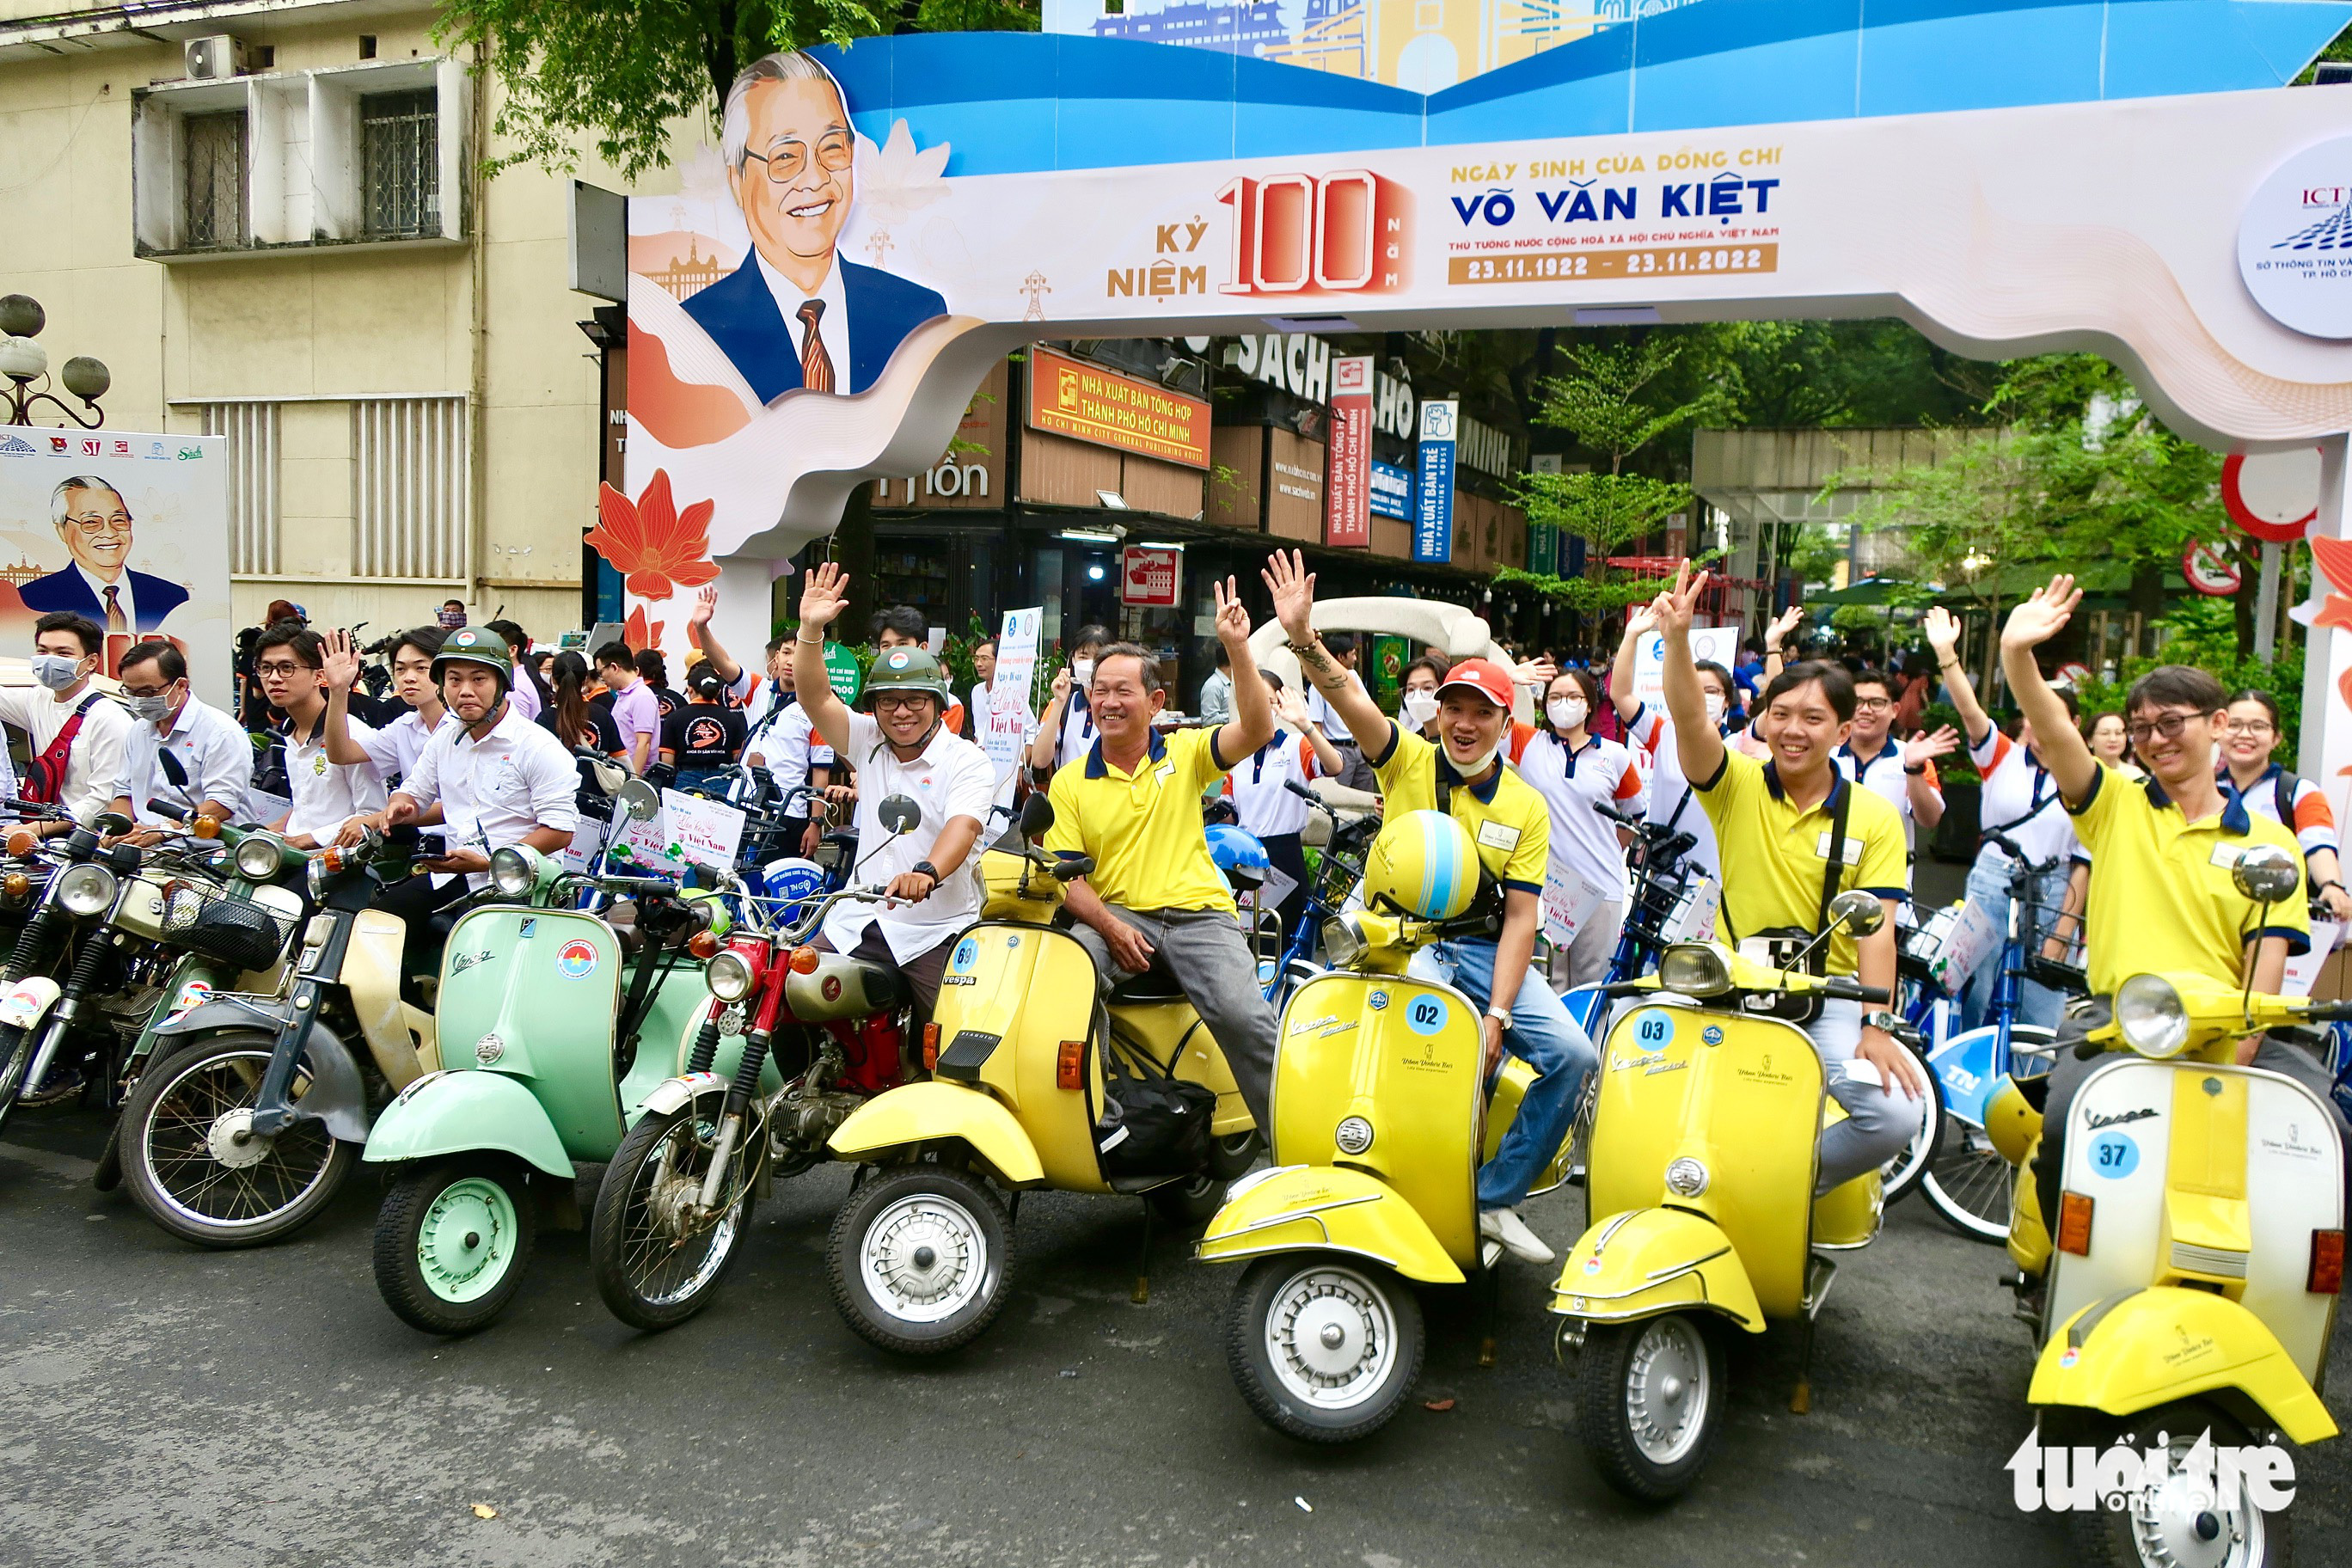 Ho Chi Minh City organizes activities to mark Vietnam Cultural Heritage Day